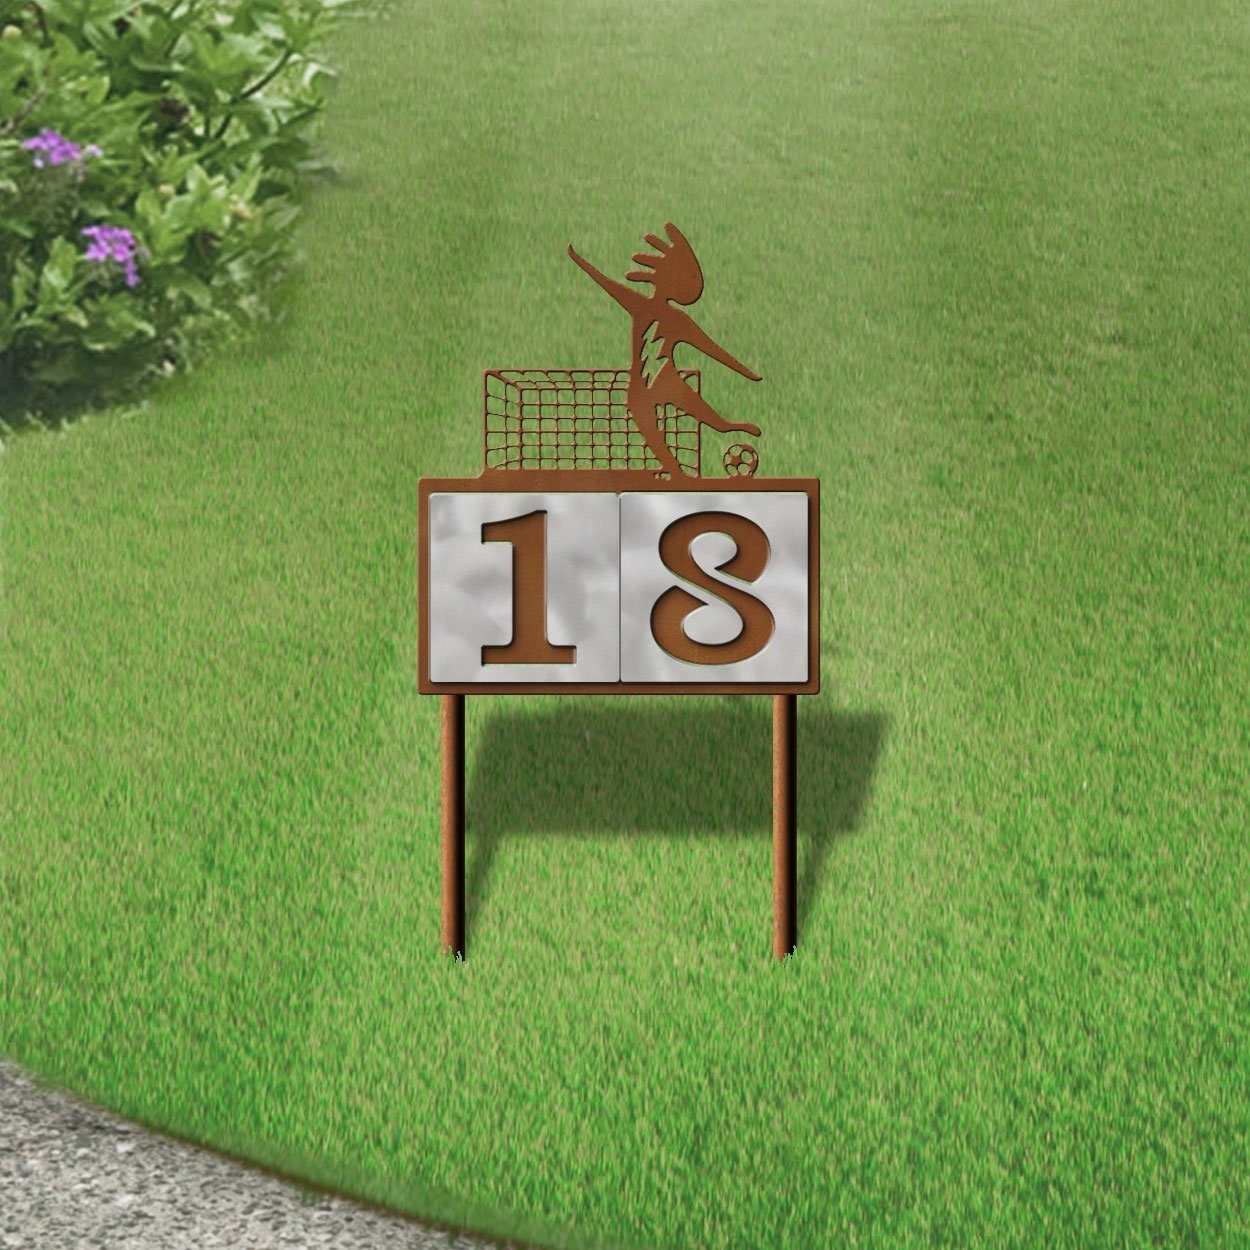 610182 - Kokopelli Lone Soccer Player Design 2-Digit Horizontal 6-inch Tile Outdoor House Numbers Yard Sign